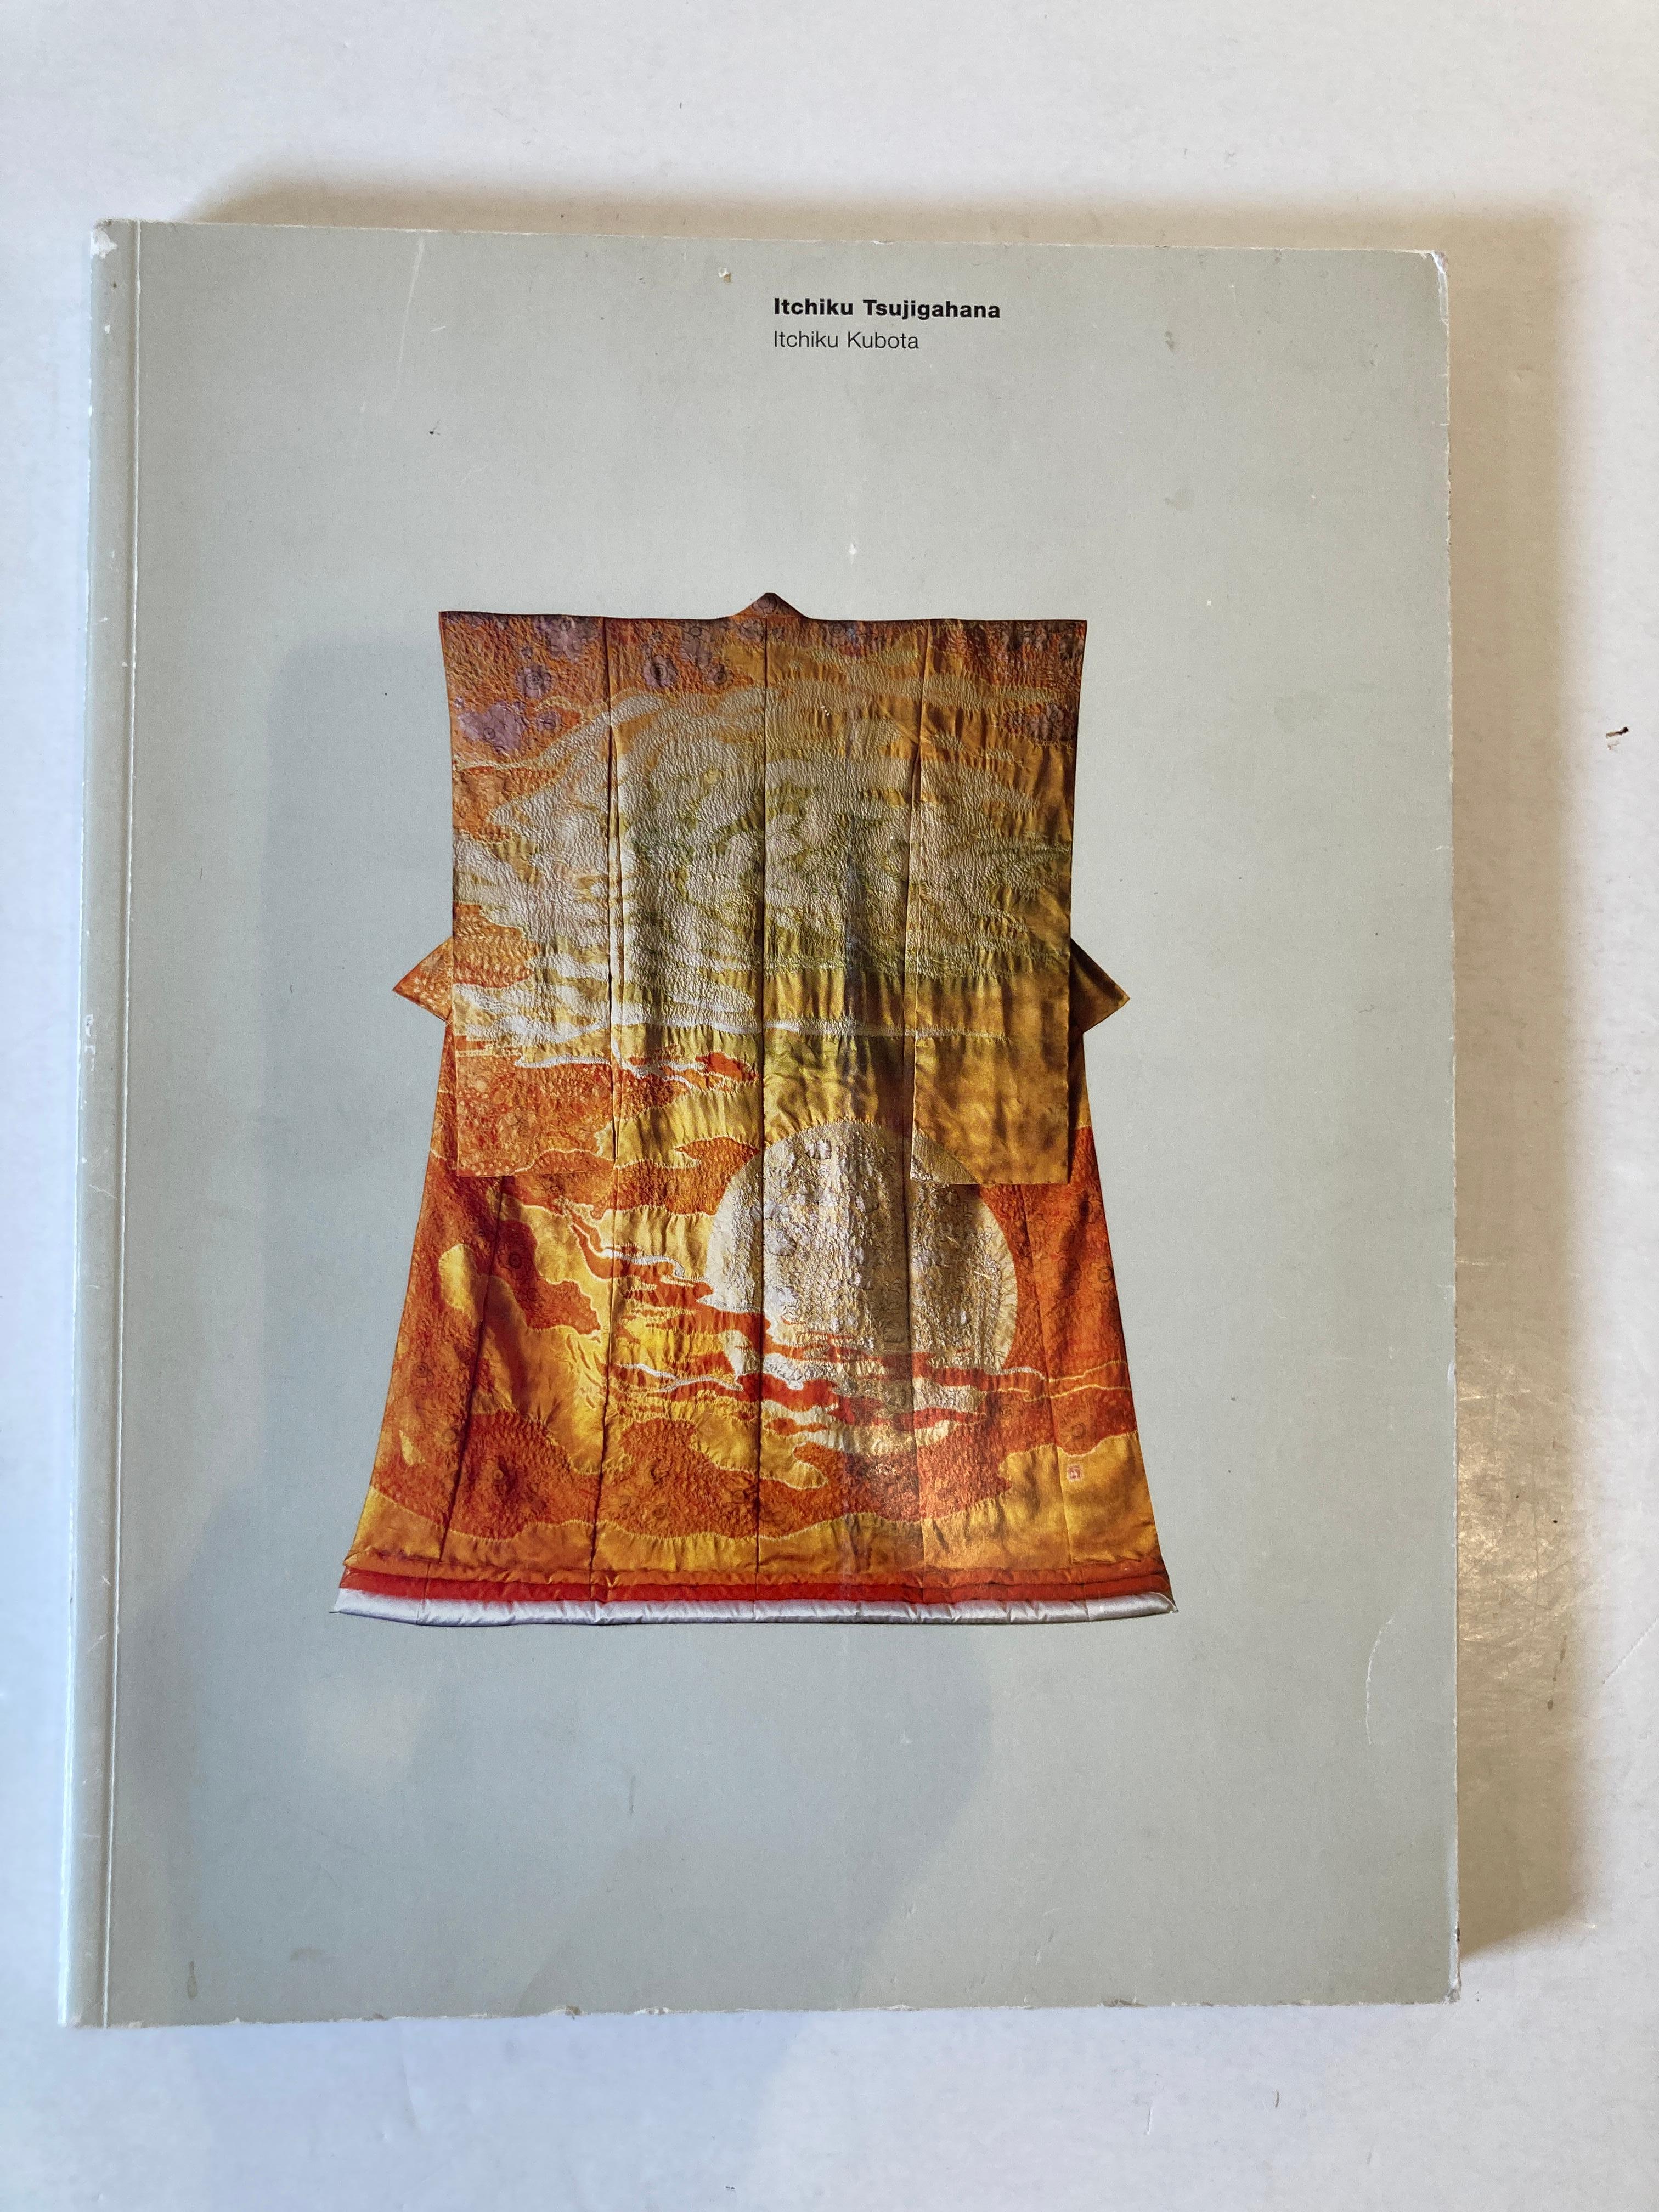 Itchiku Tsujigahana: Homage to Nature, Landscape Kimonos by Itchiku Kubota.
Itchiku Kubota was a Japanese textile artist. He was most famous for reviving and in part reinventing an otherwise lost late 15th- to early 16th-century textile dye